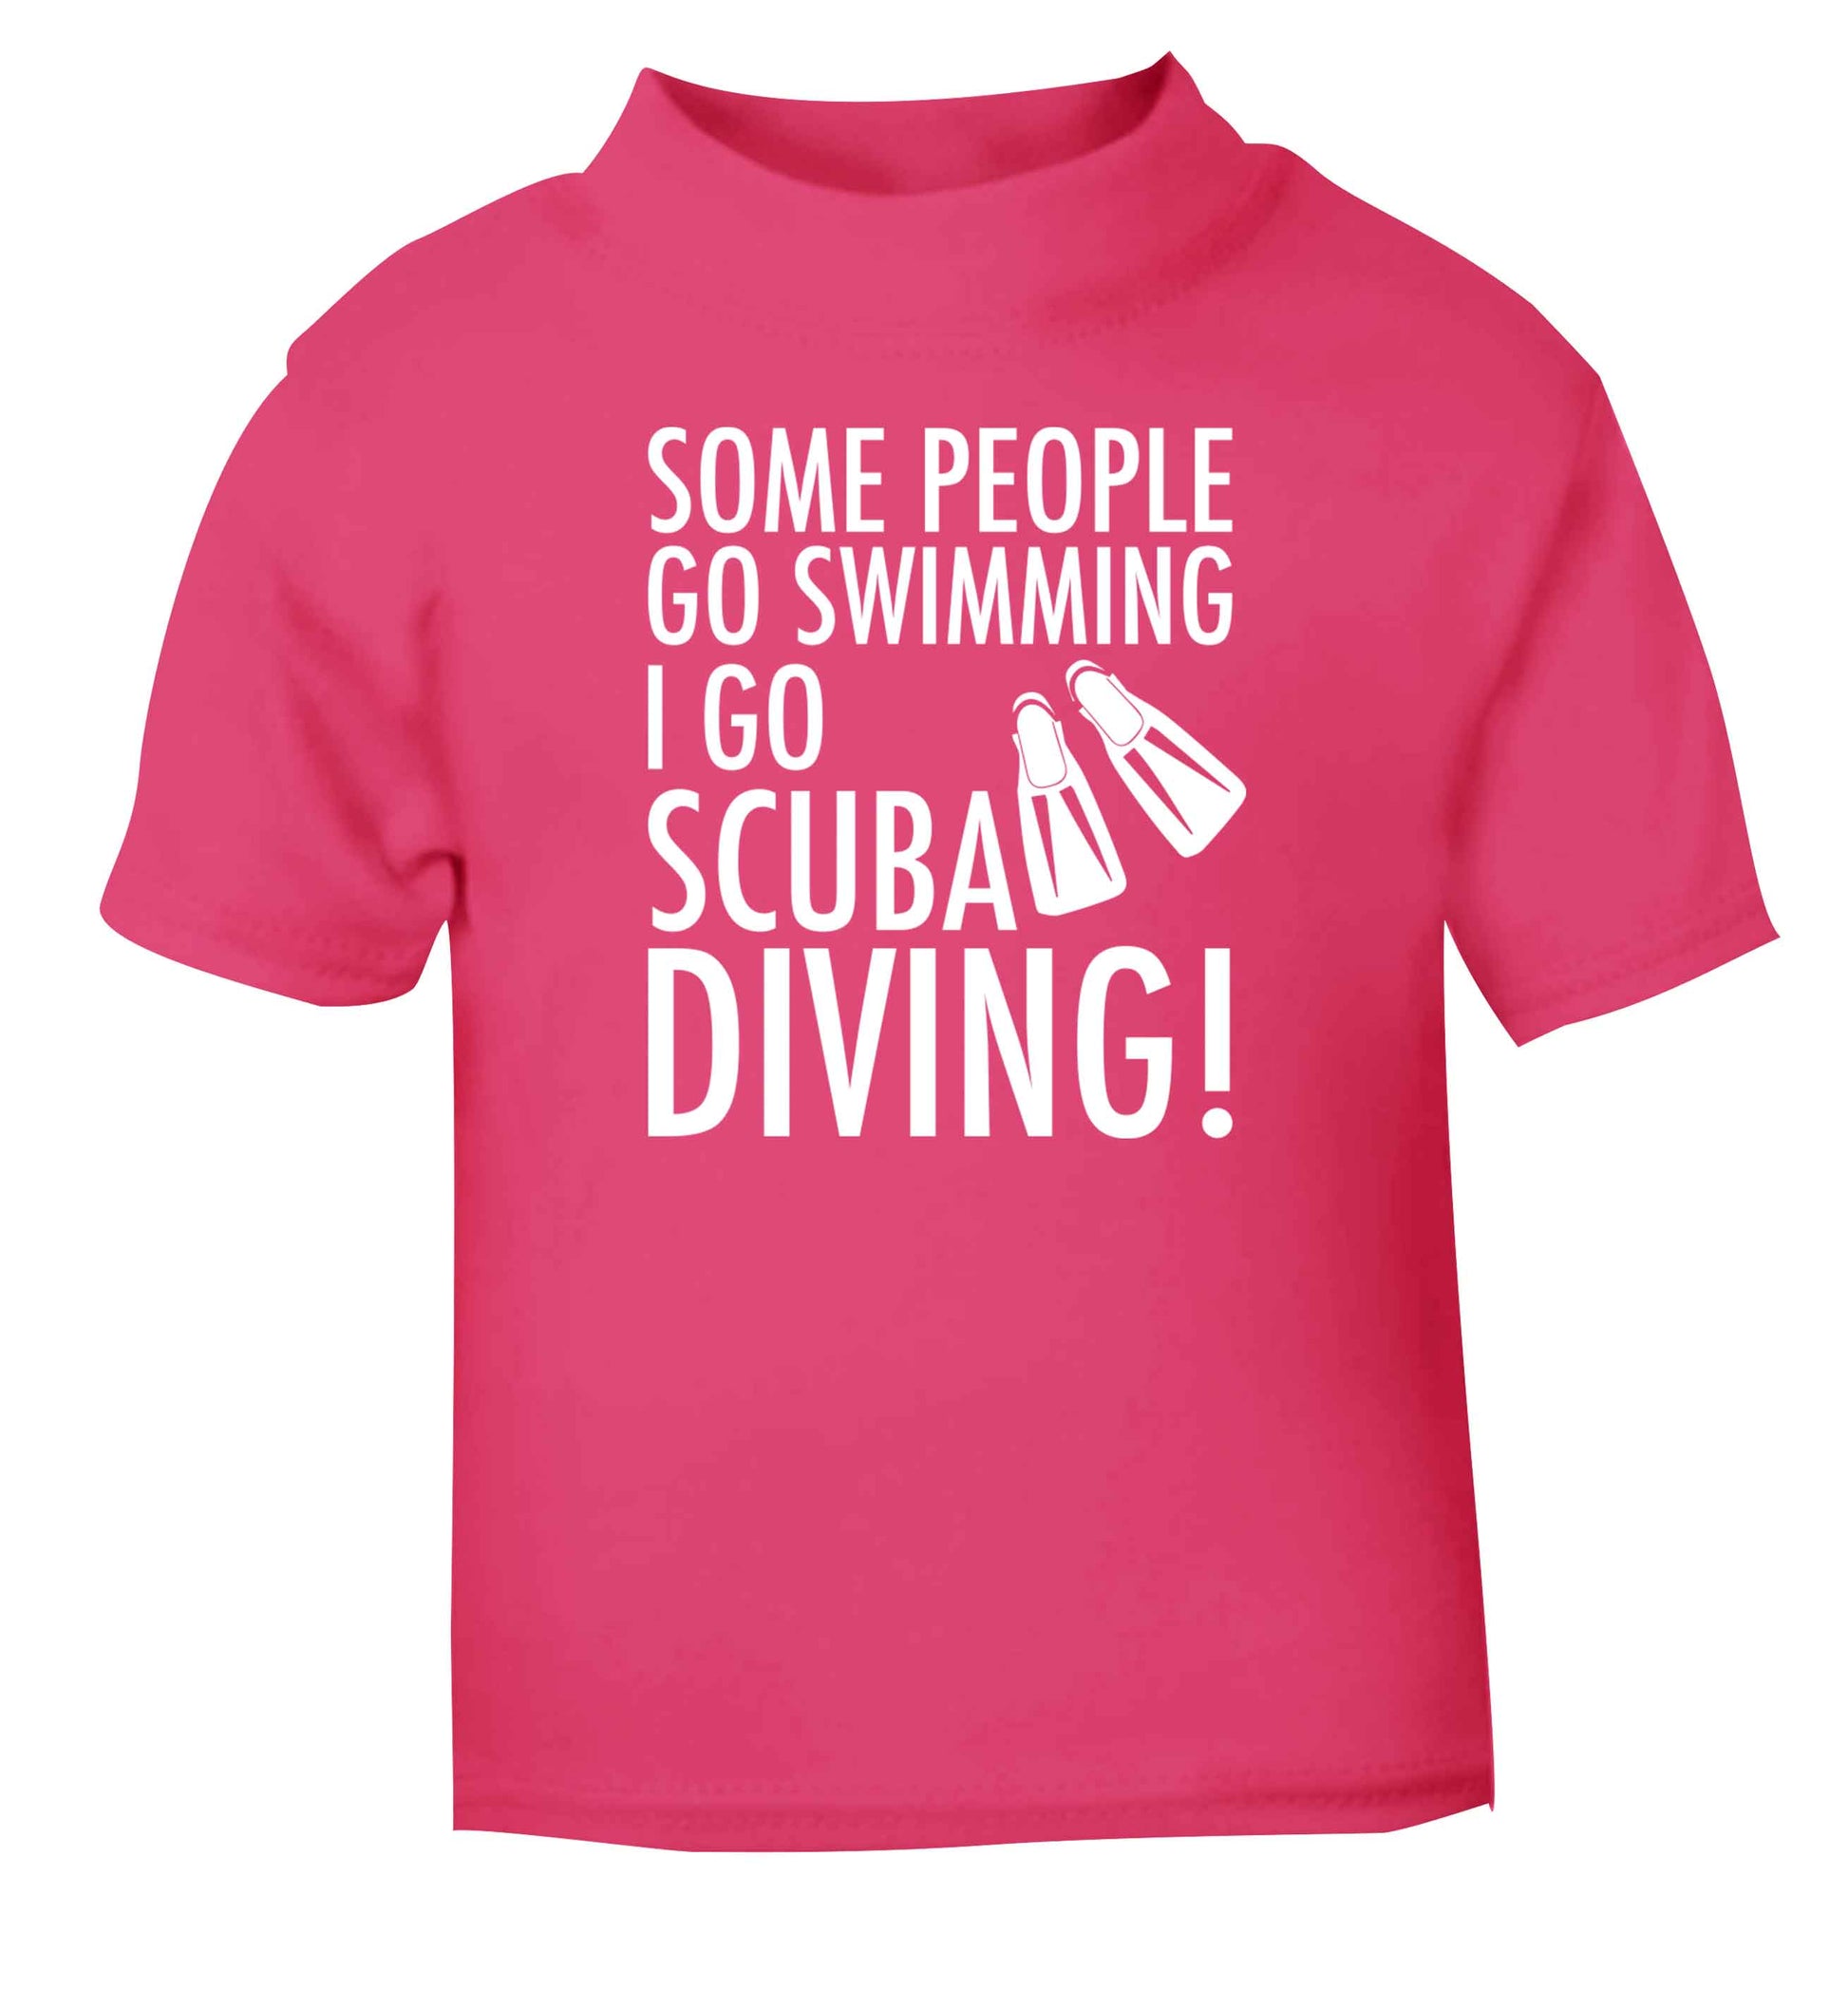 Some people go swimming I go scuba diving! pink Baby Toddler Tshirt 2 Years